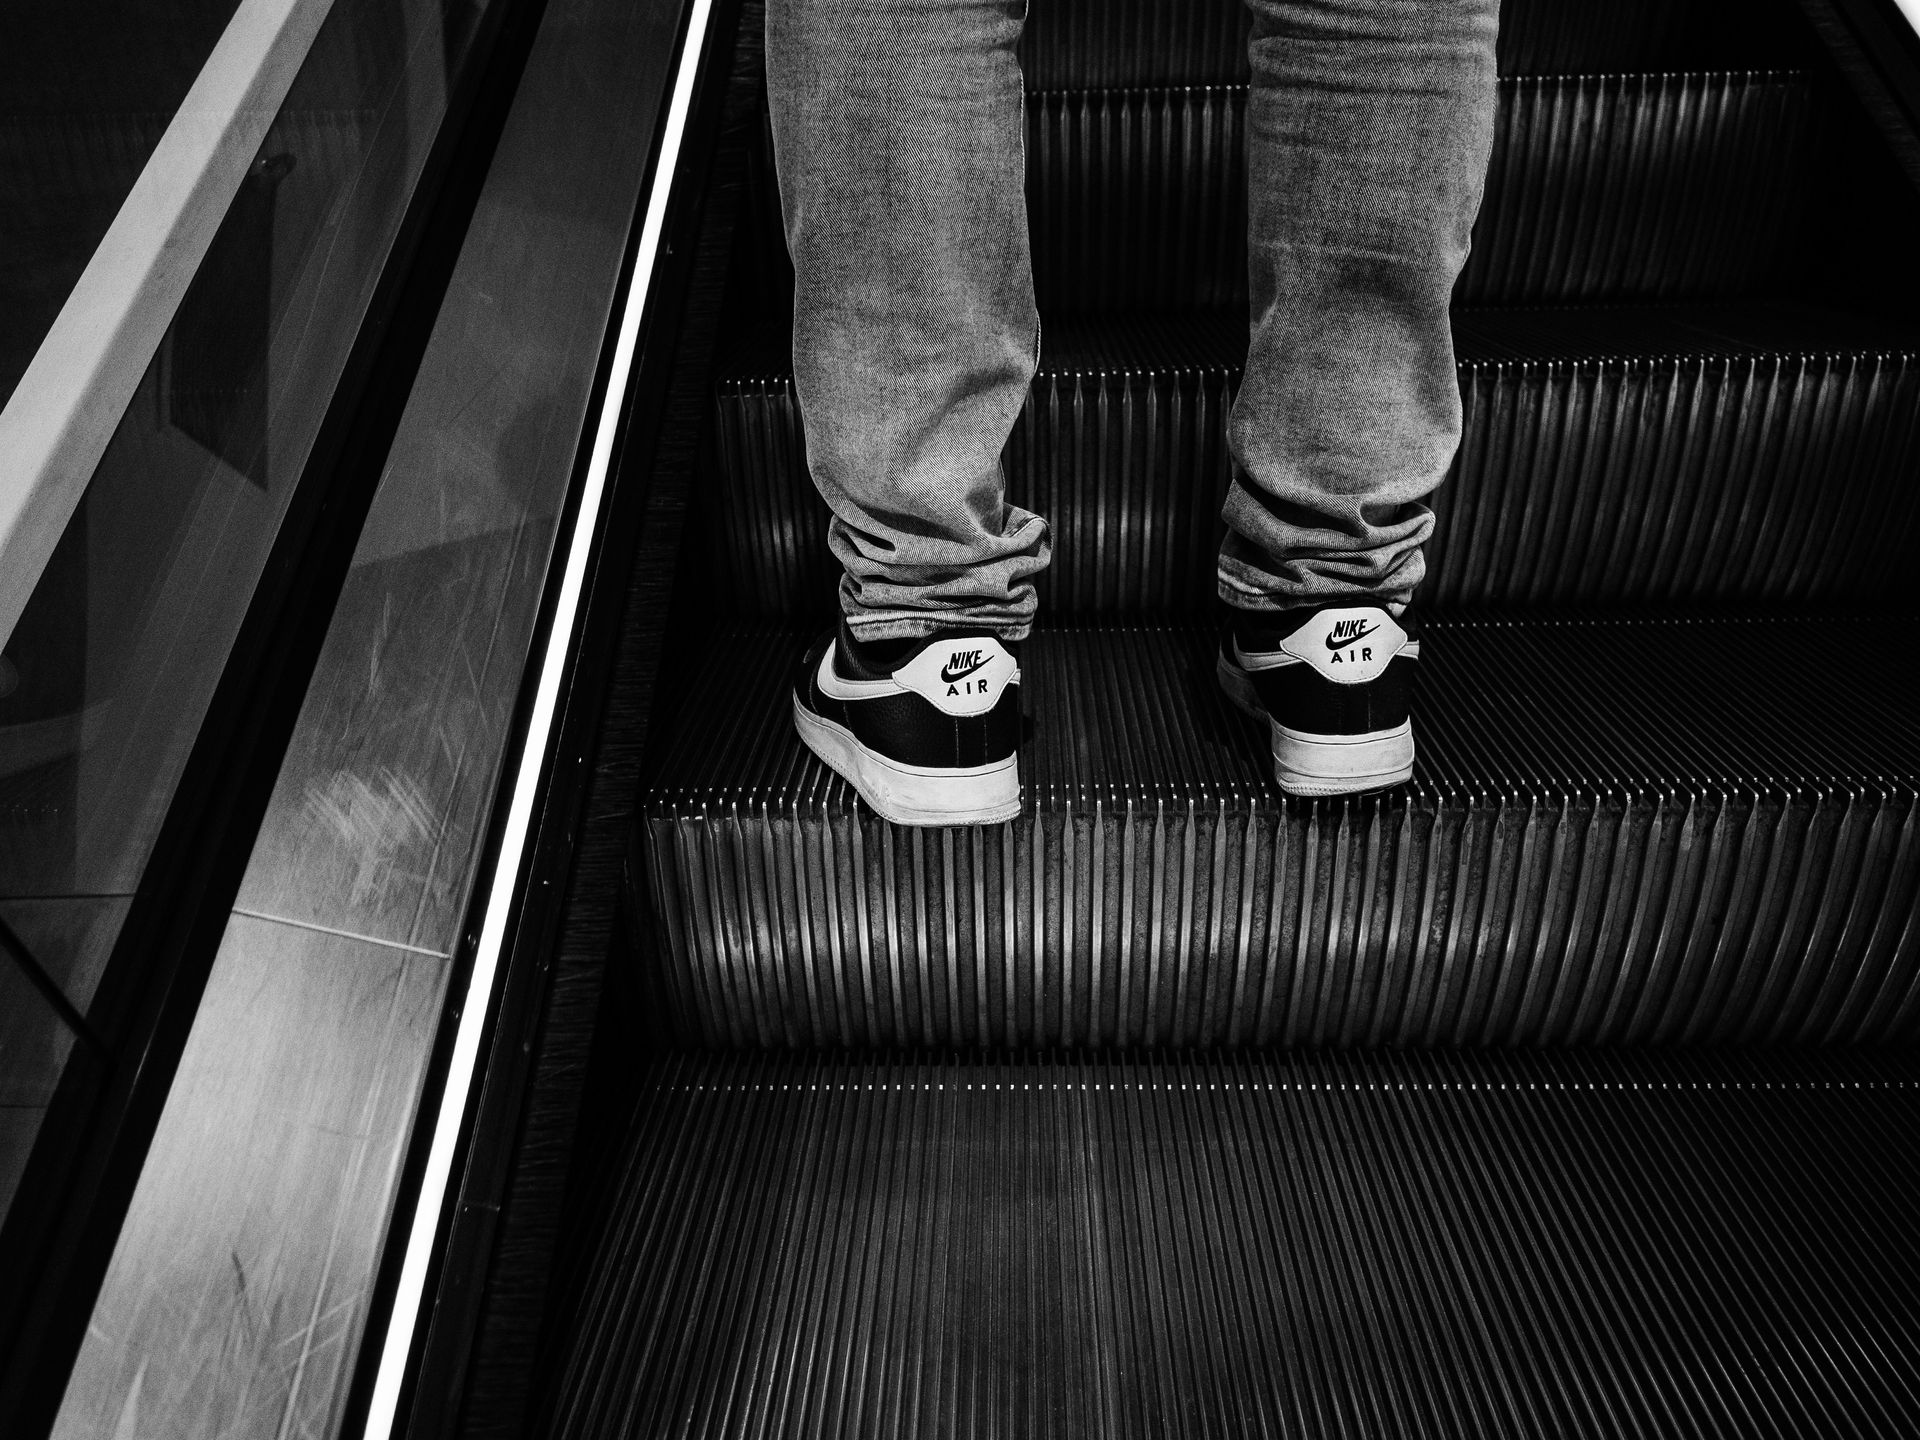 Person wearing Nike shoes on an escalator